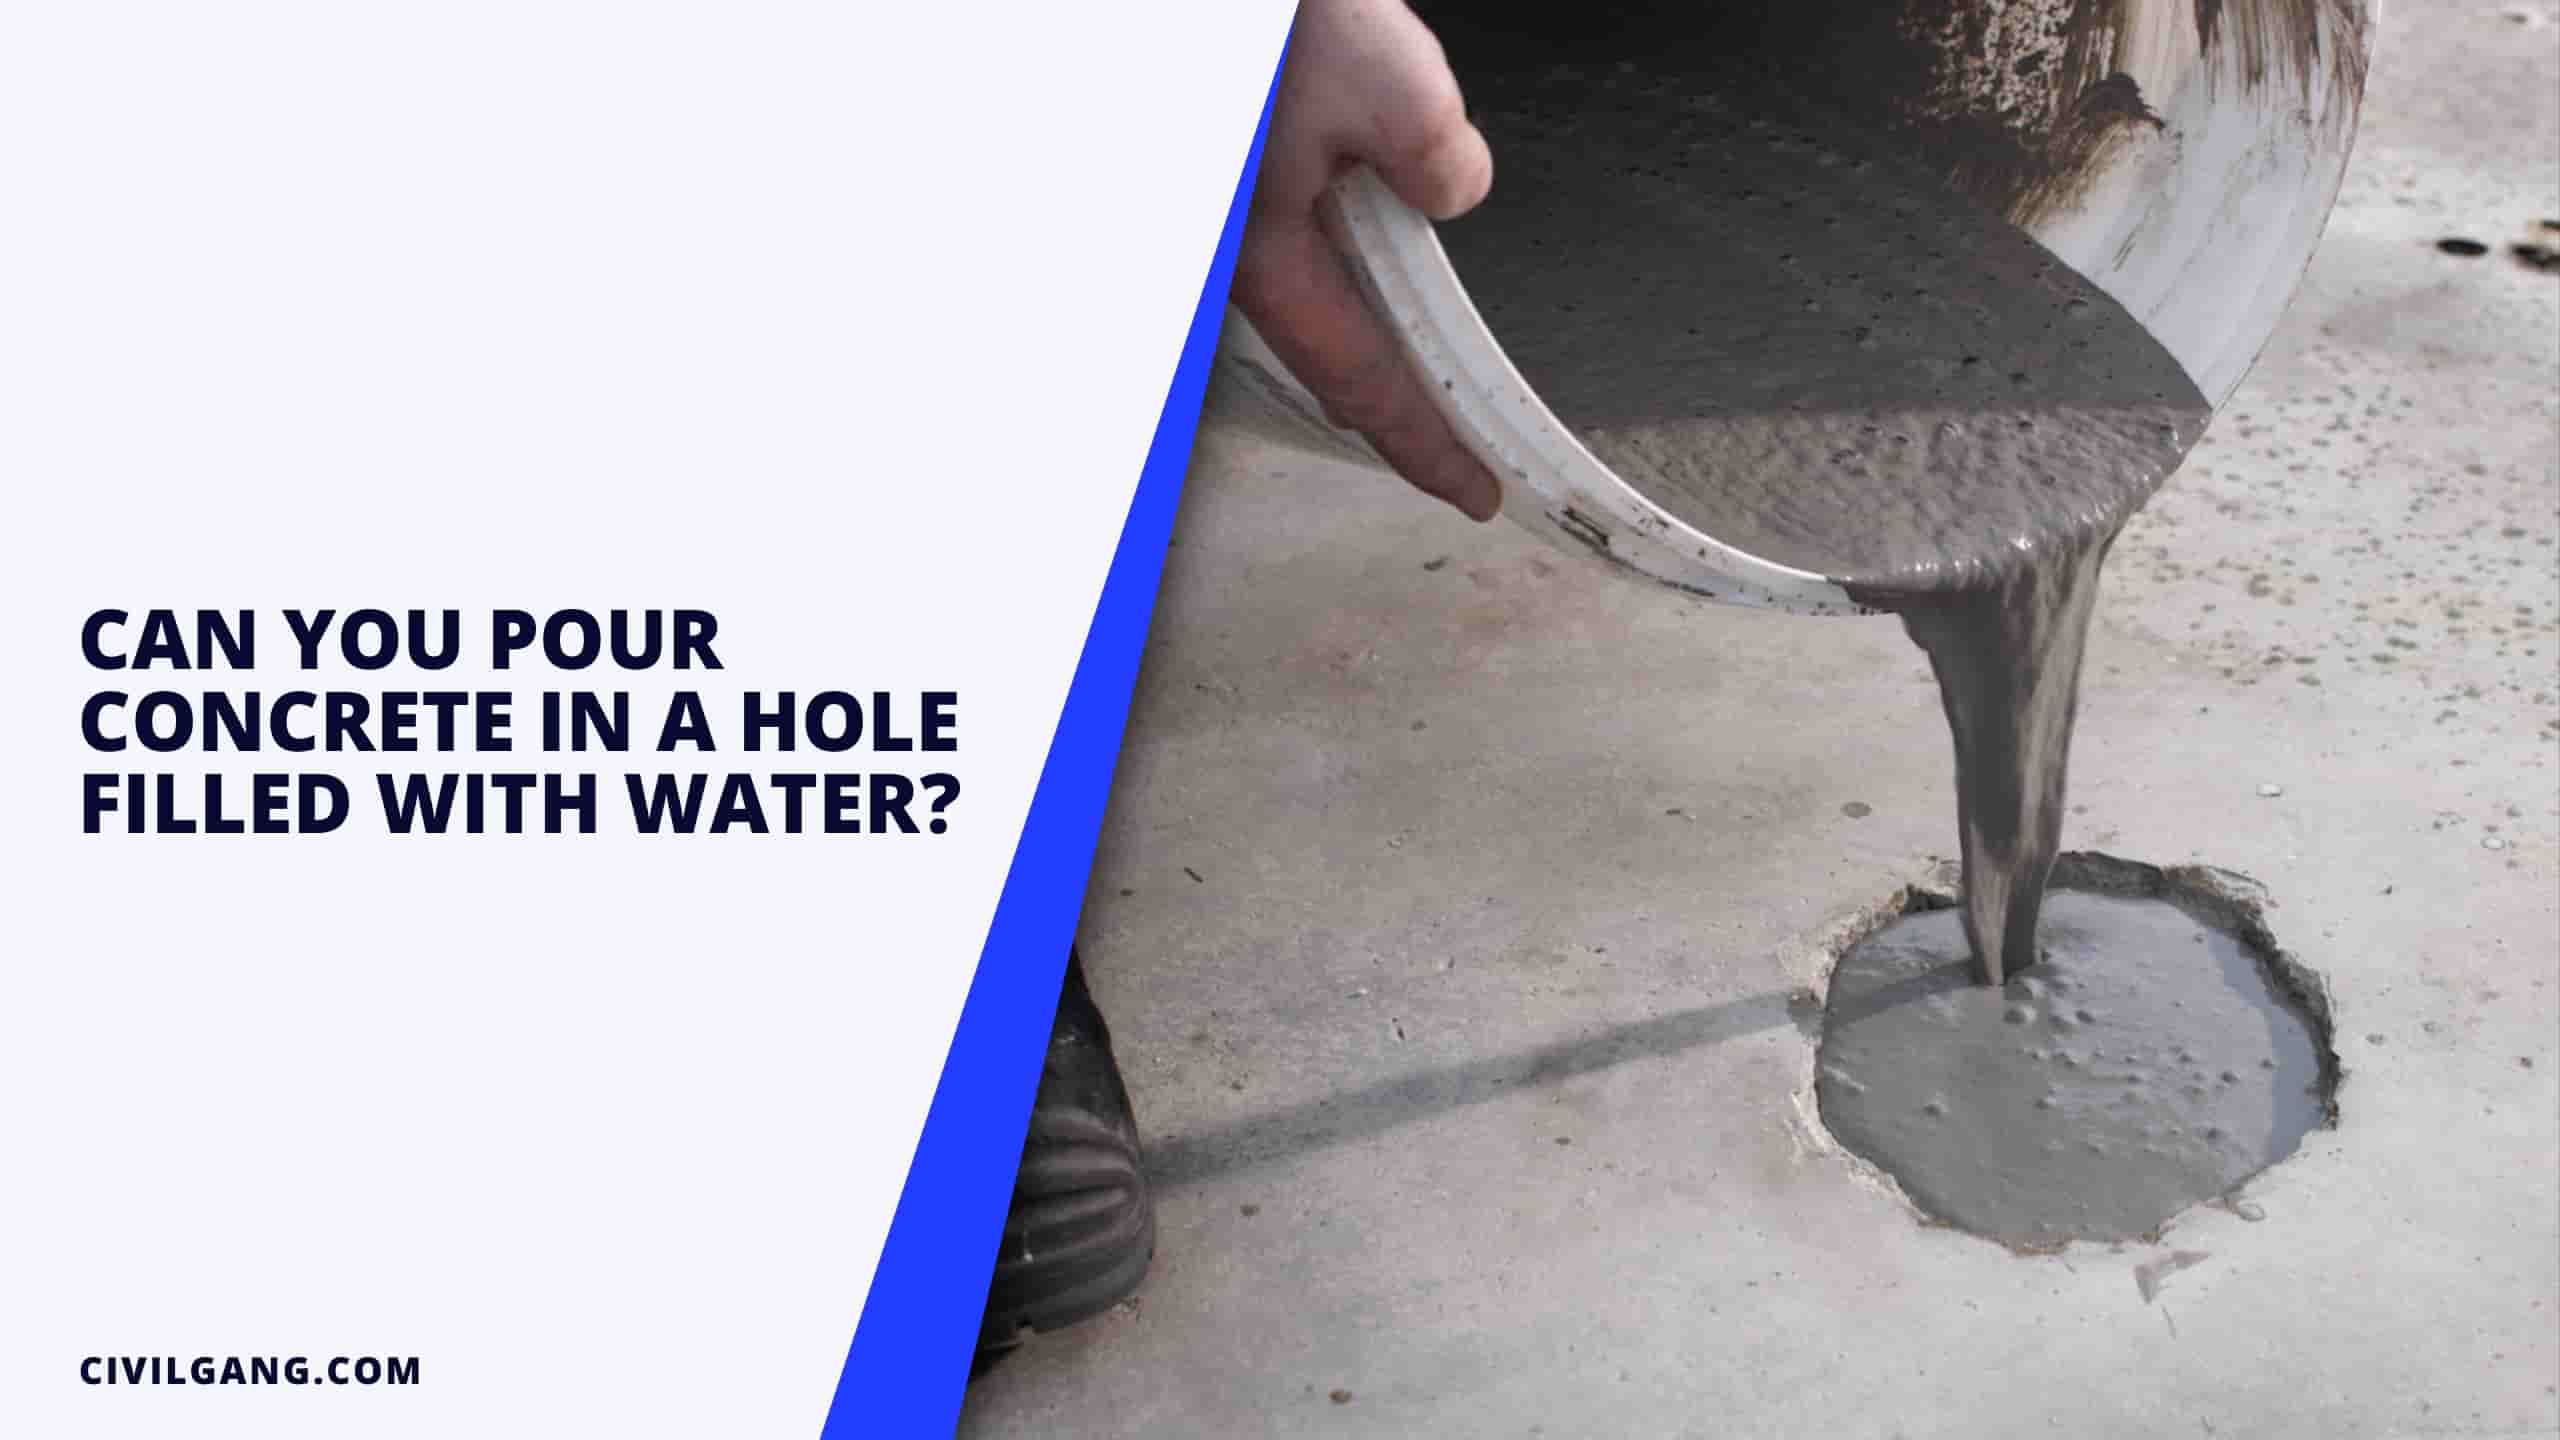 Can You Pour Concrete In A Hole Filled With Water?